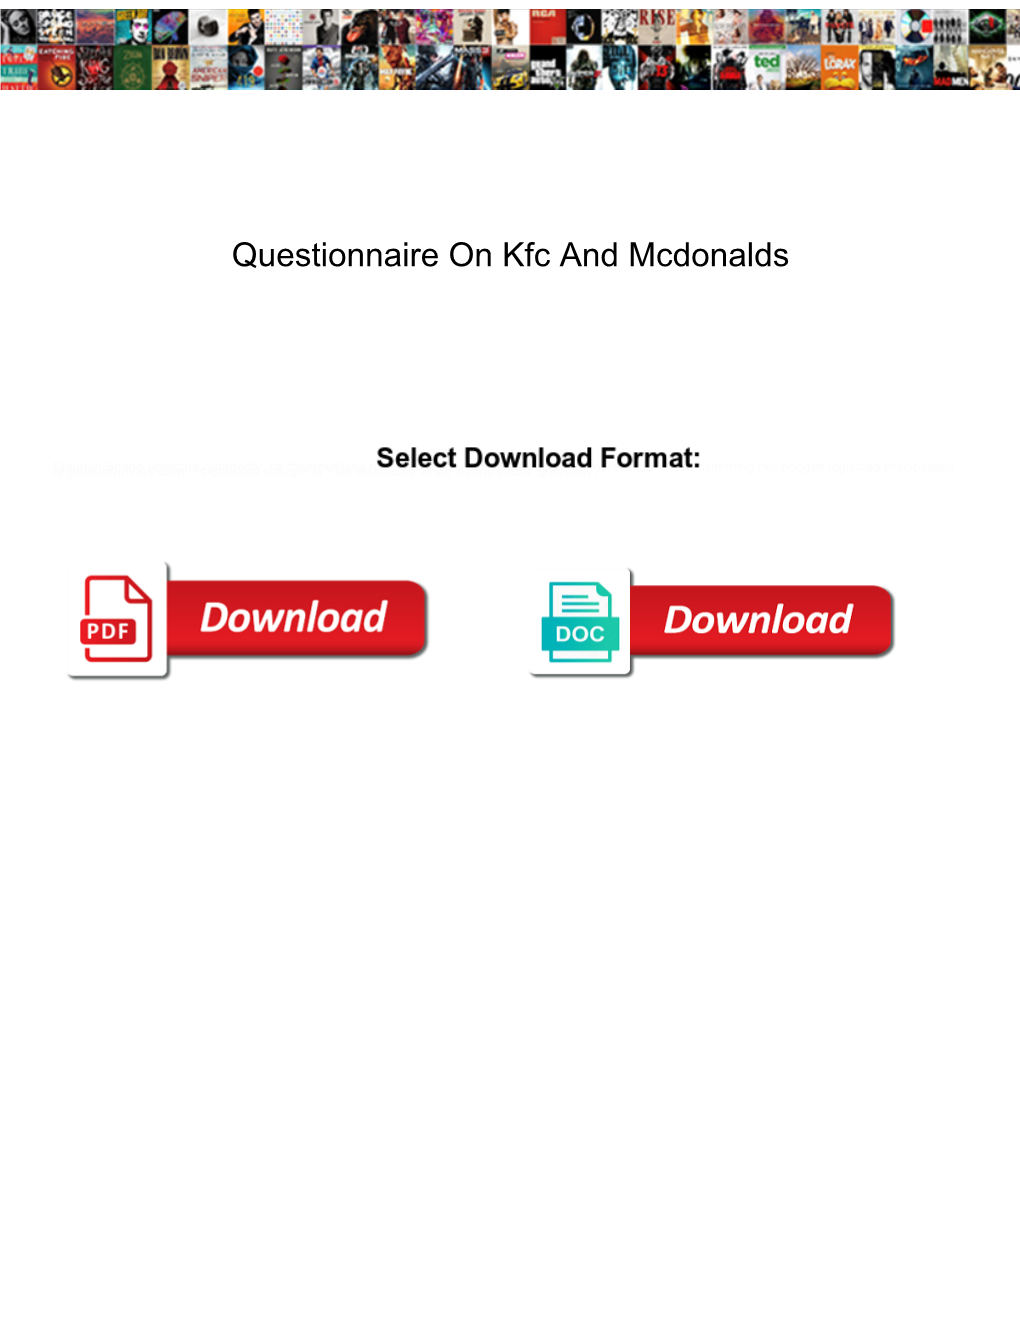 Questionnaire on Kfc and Mcdonalds